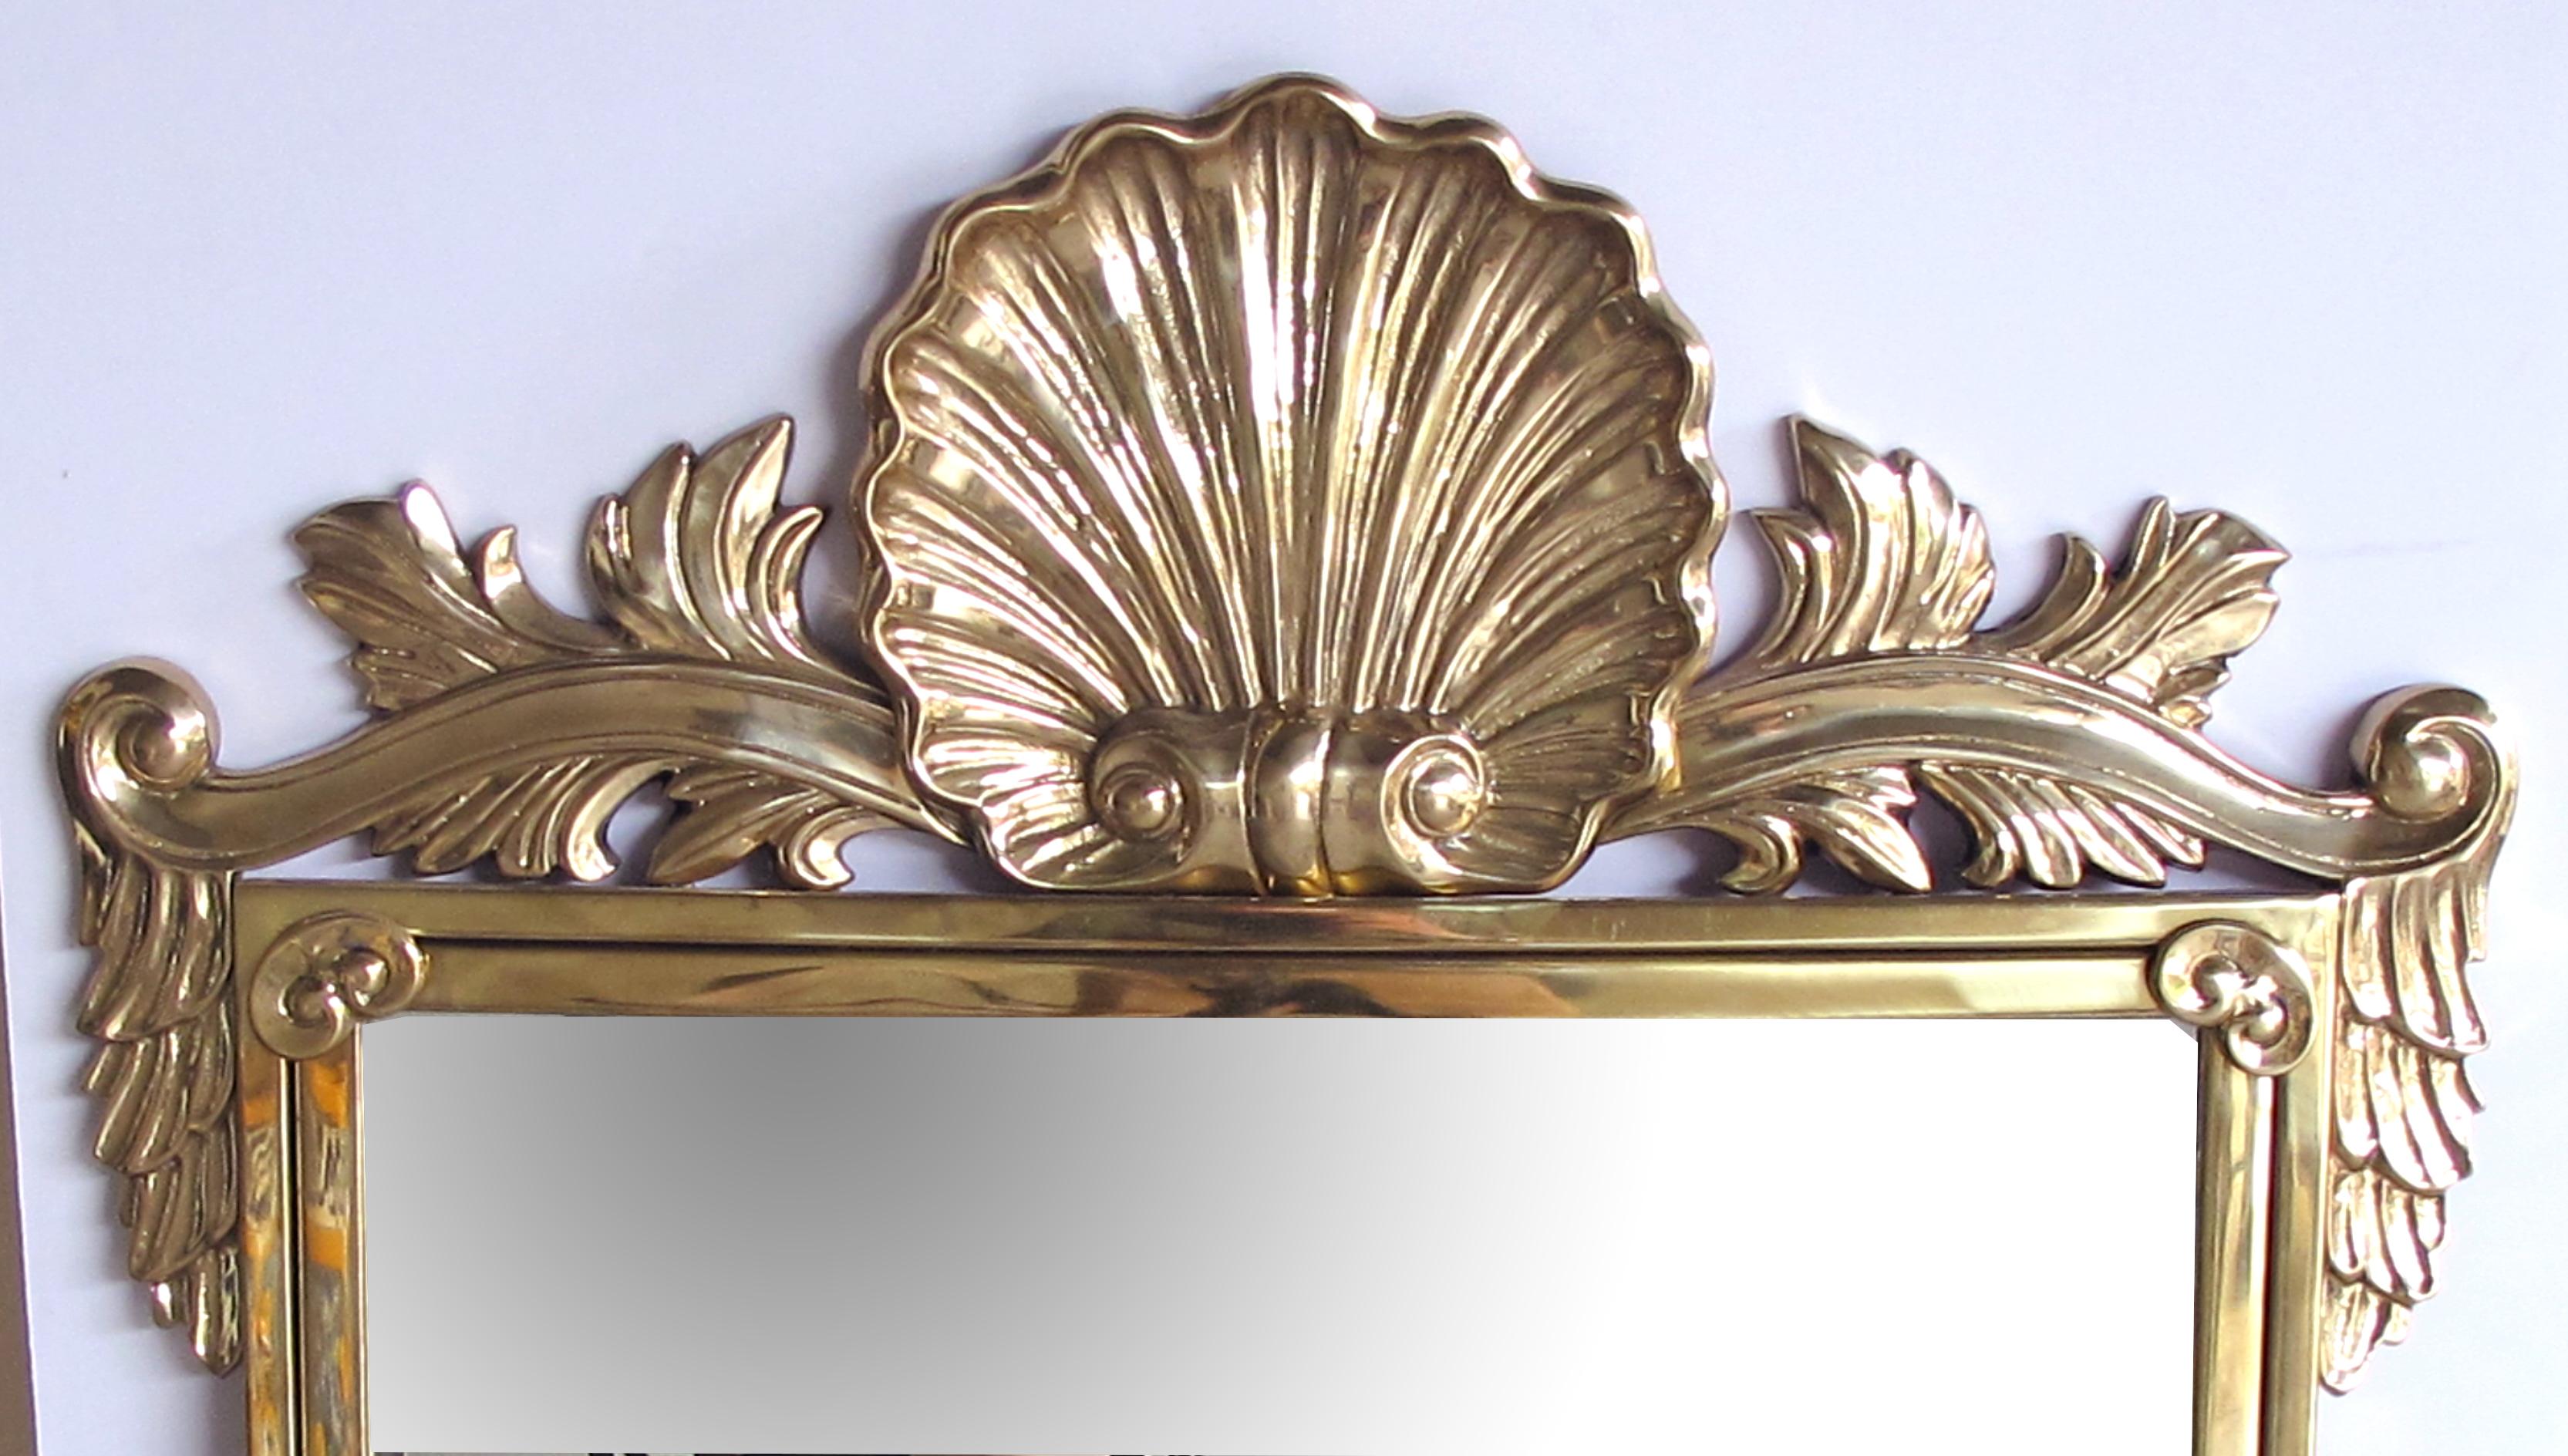 A good quality Italian Hollywood regency solid brass mirror with over-scaled shell crest by Decorative Crafts, Inc. est. 1928; in the neoclassical taste, the boldly-scaled solid brass crest centring a robust shell motif flanked by lively scrolls and